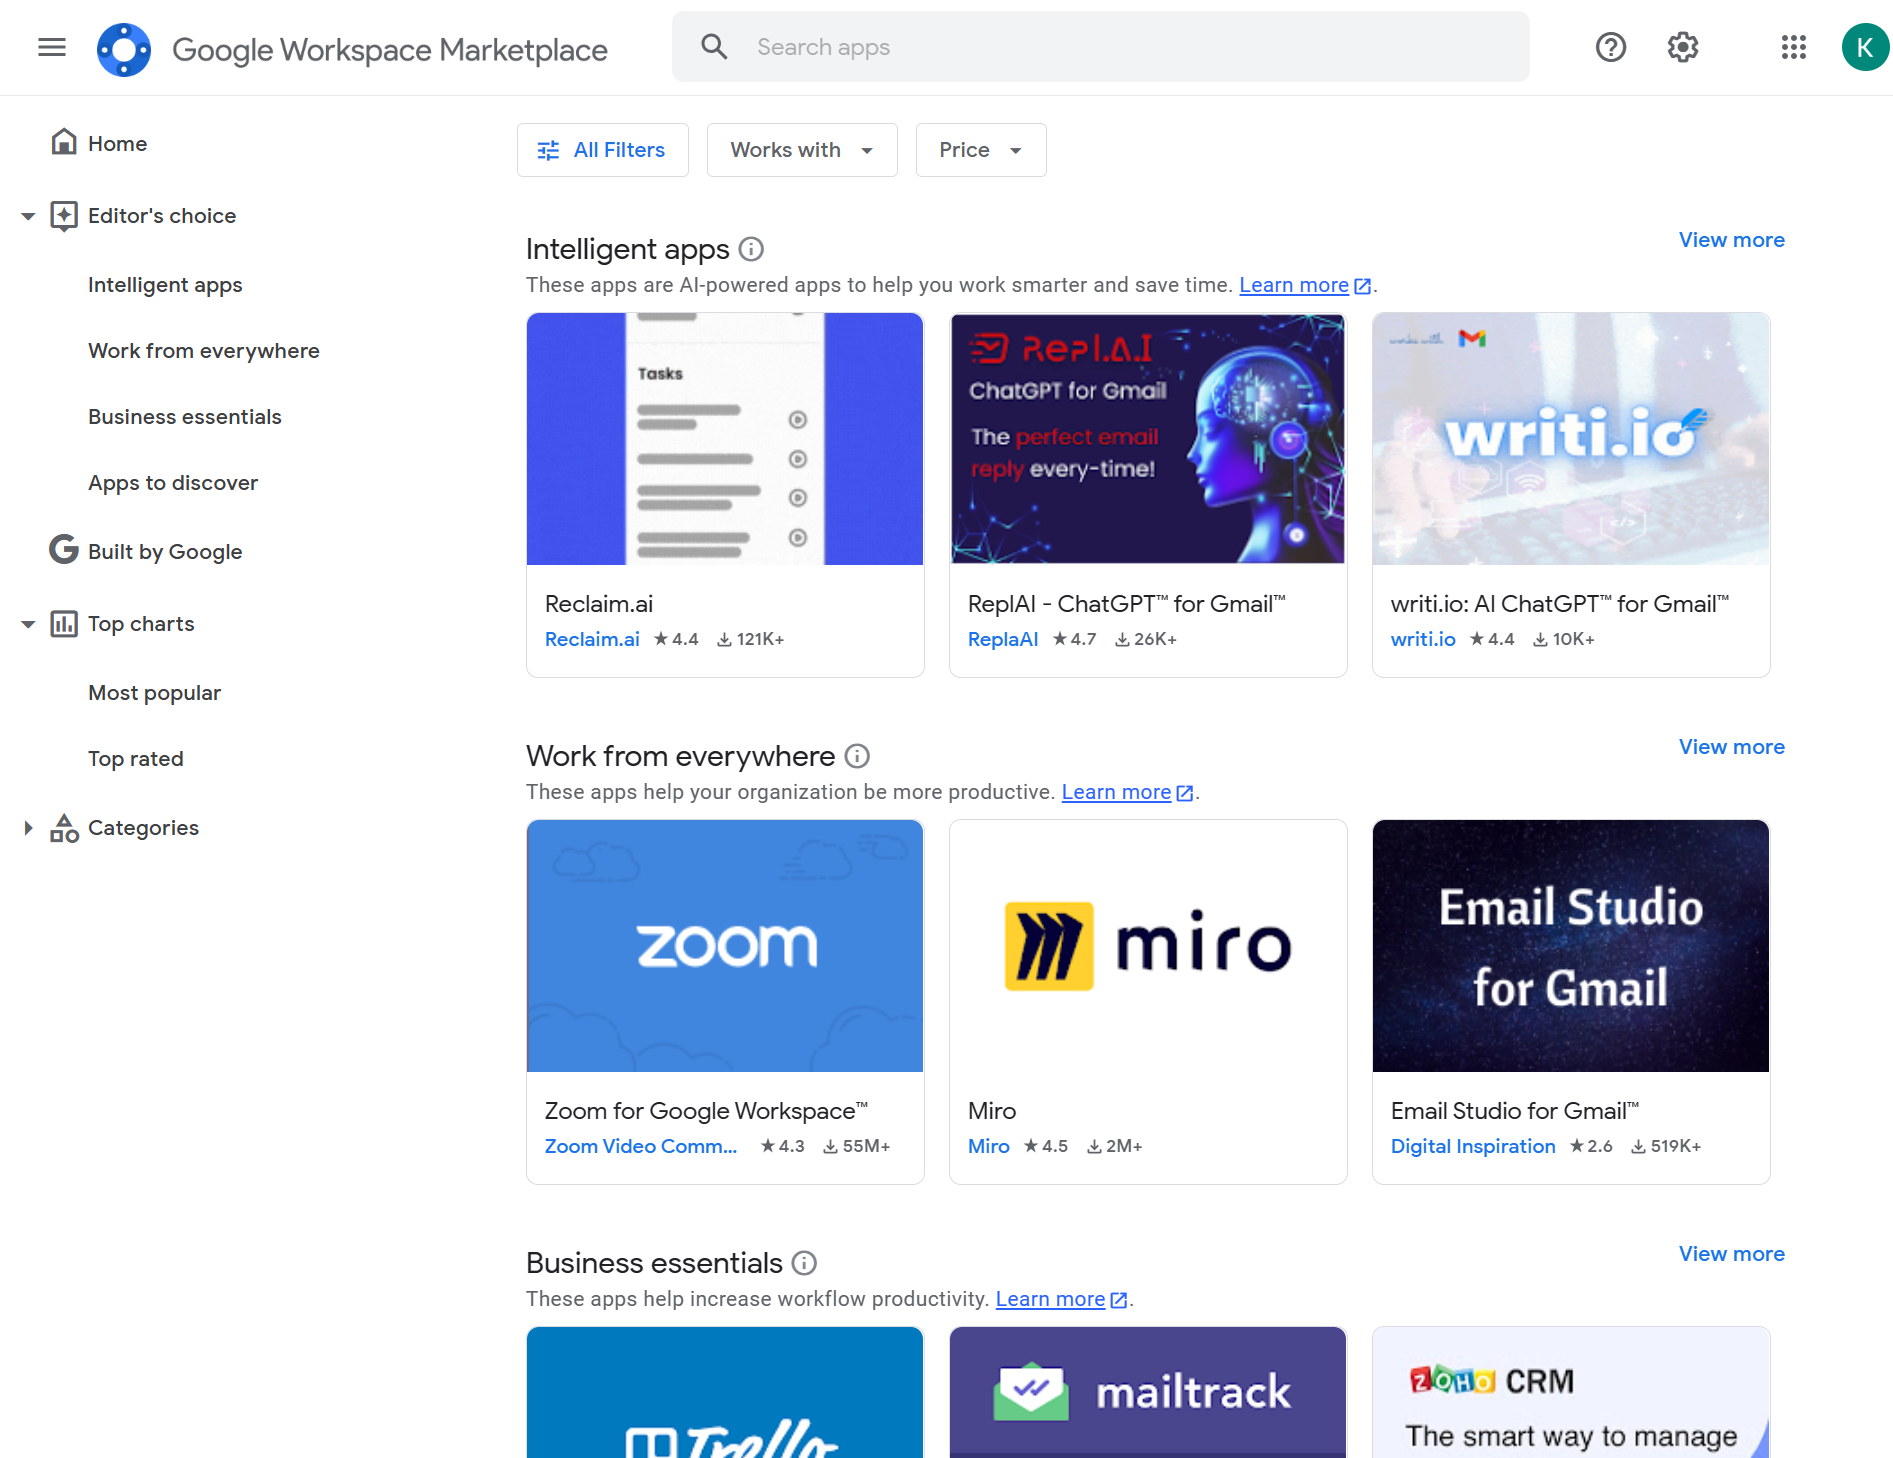 Many popular SaaS tools have developed widgets that can be added to your Google account from the Workspace Marketplace.